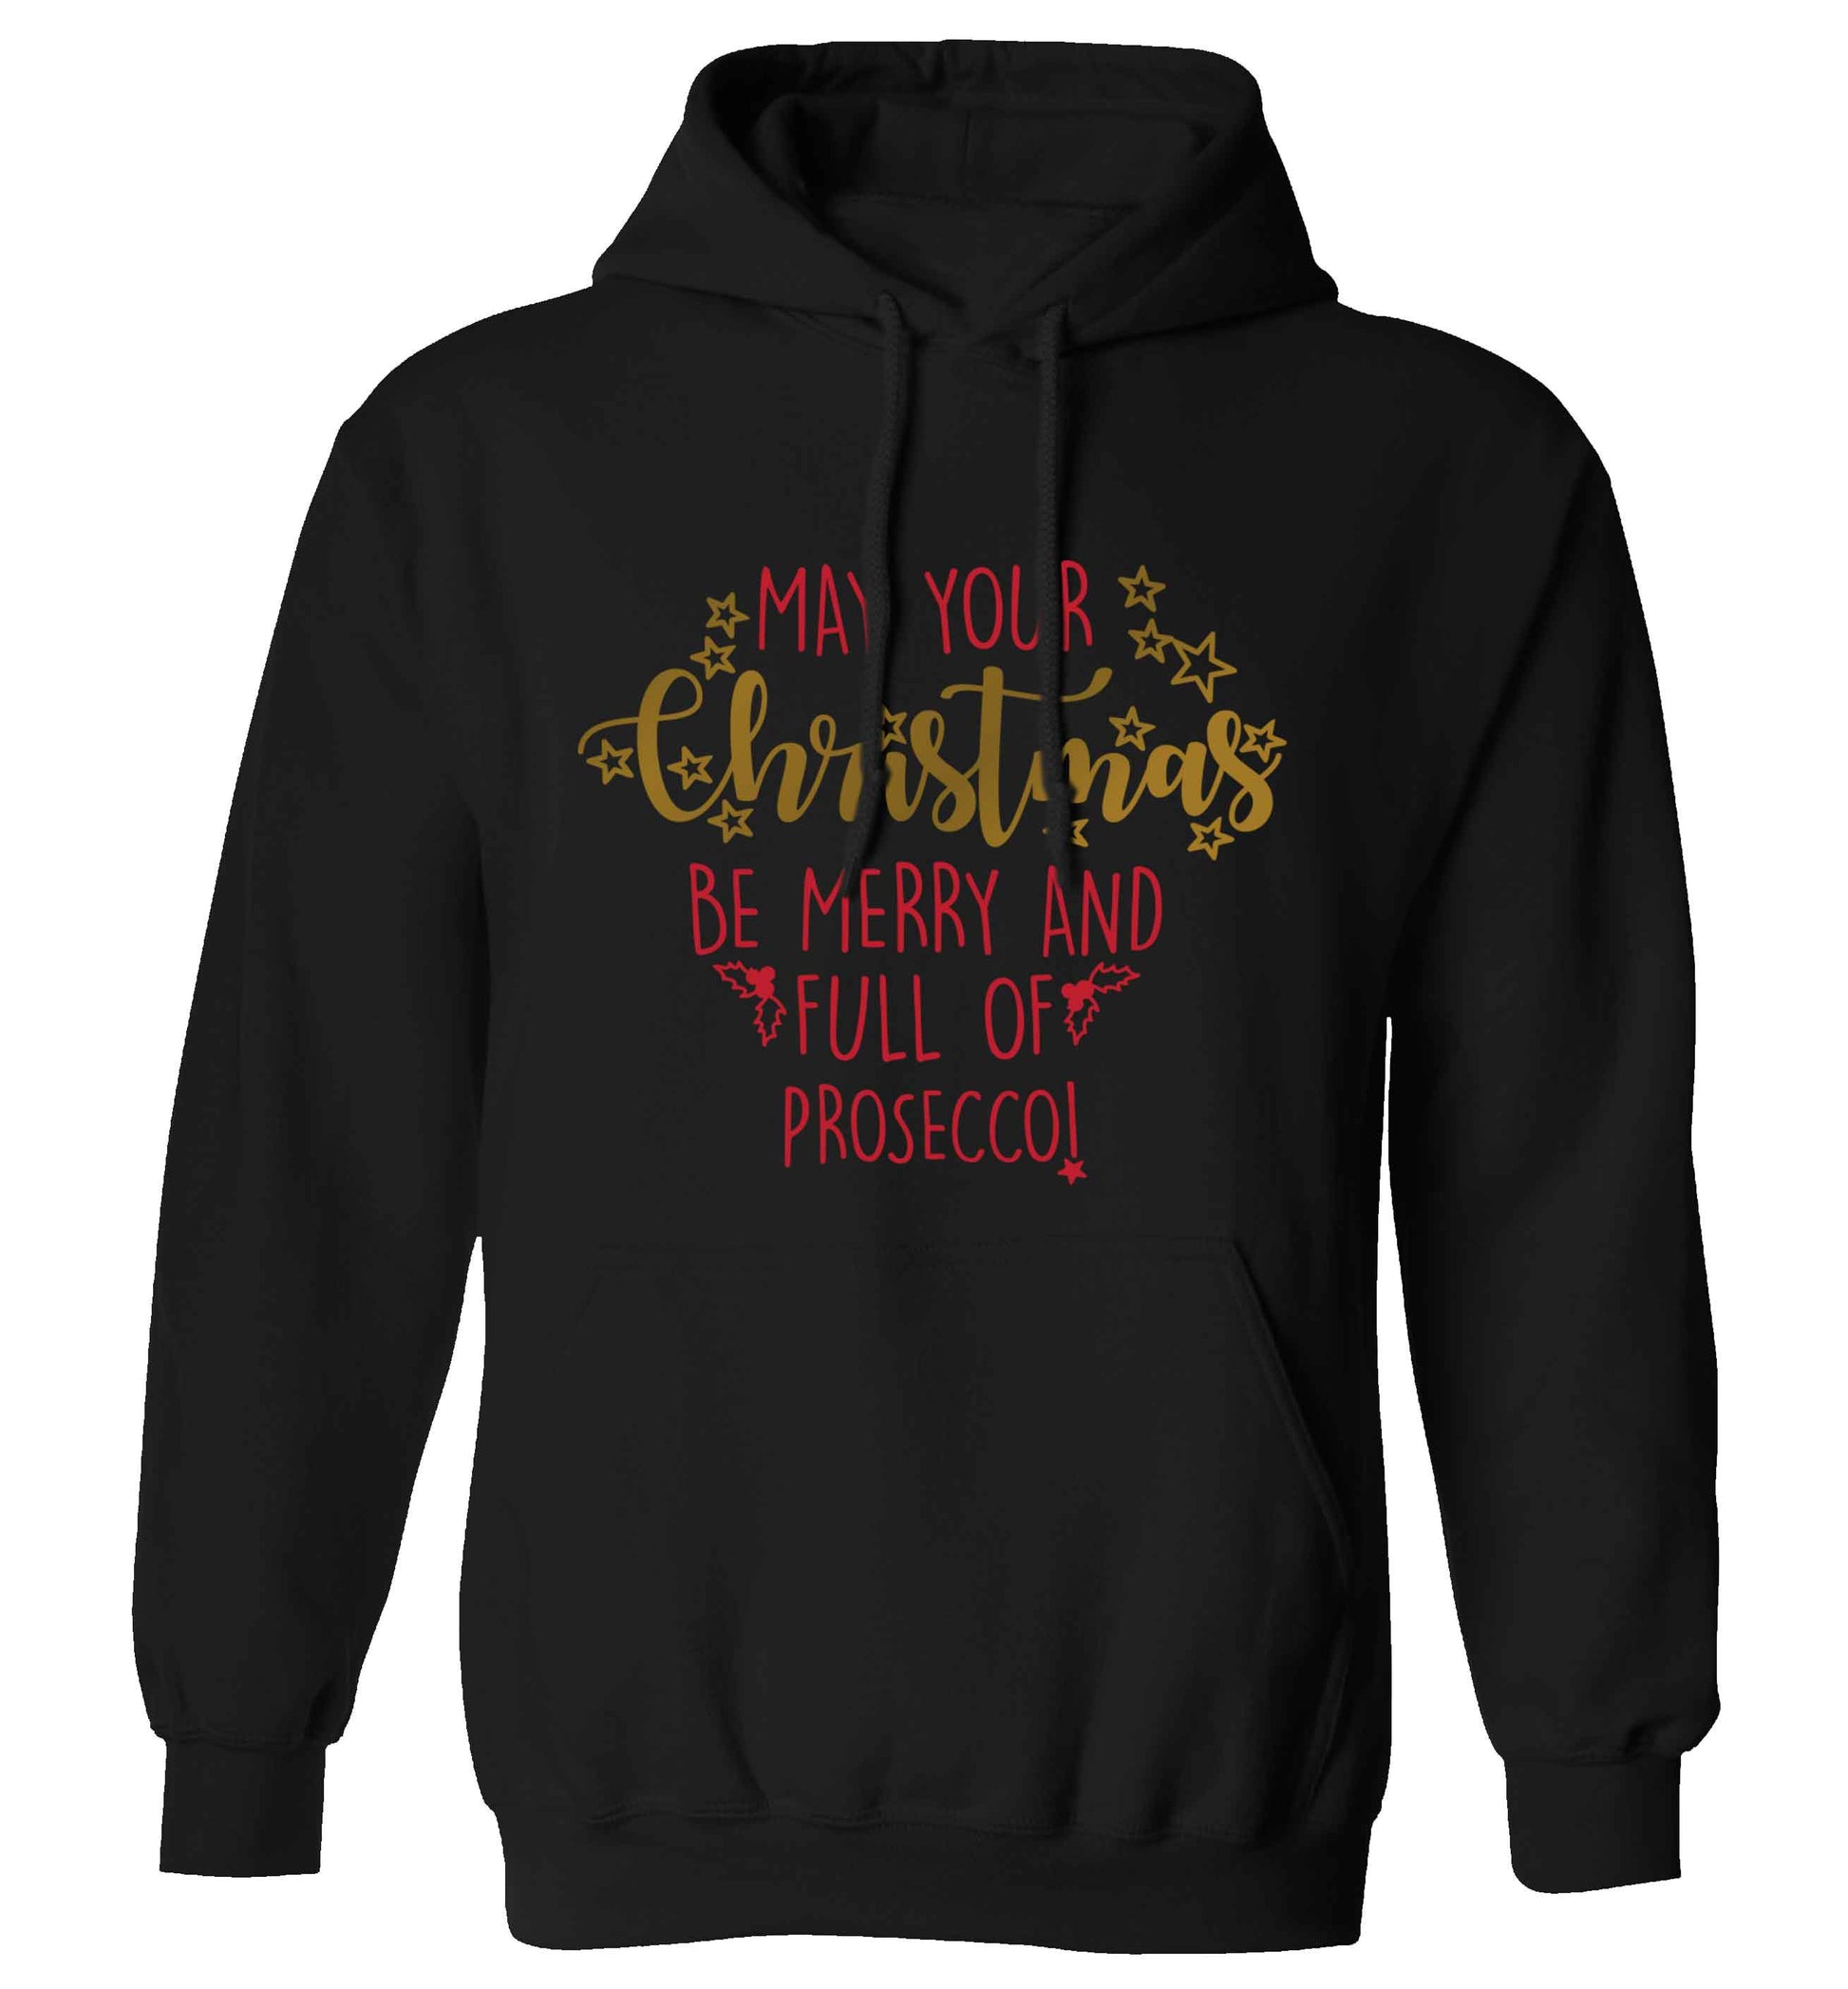 May your Christmas be merry and full of prosecco adults unisex black hoodie 2XL